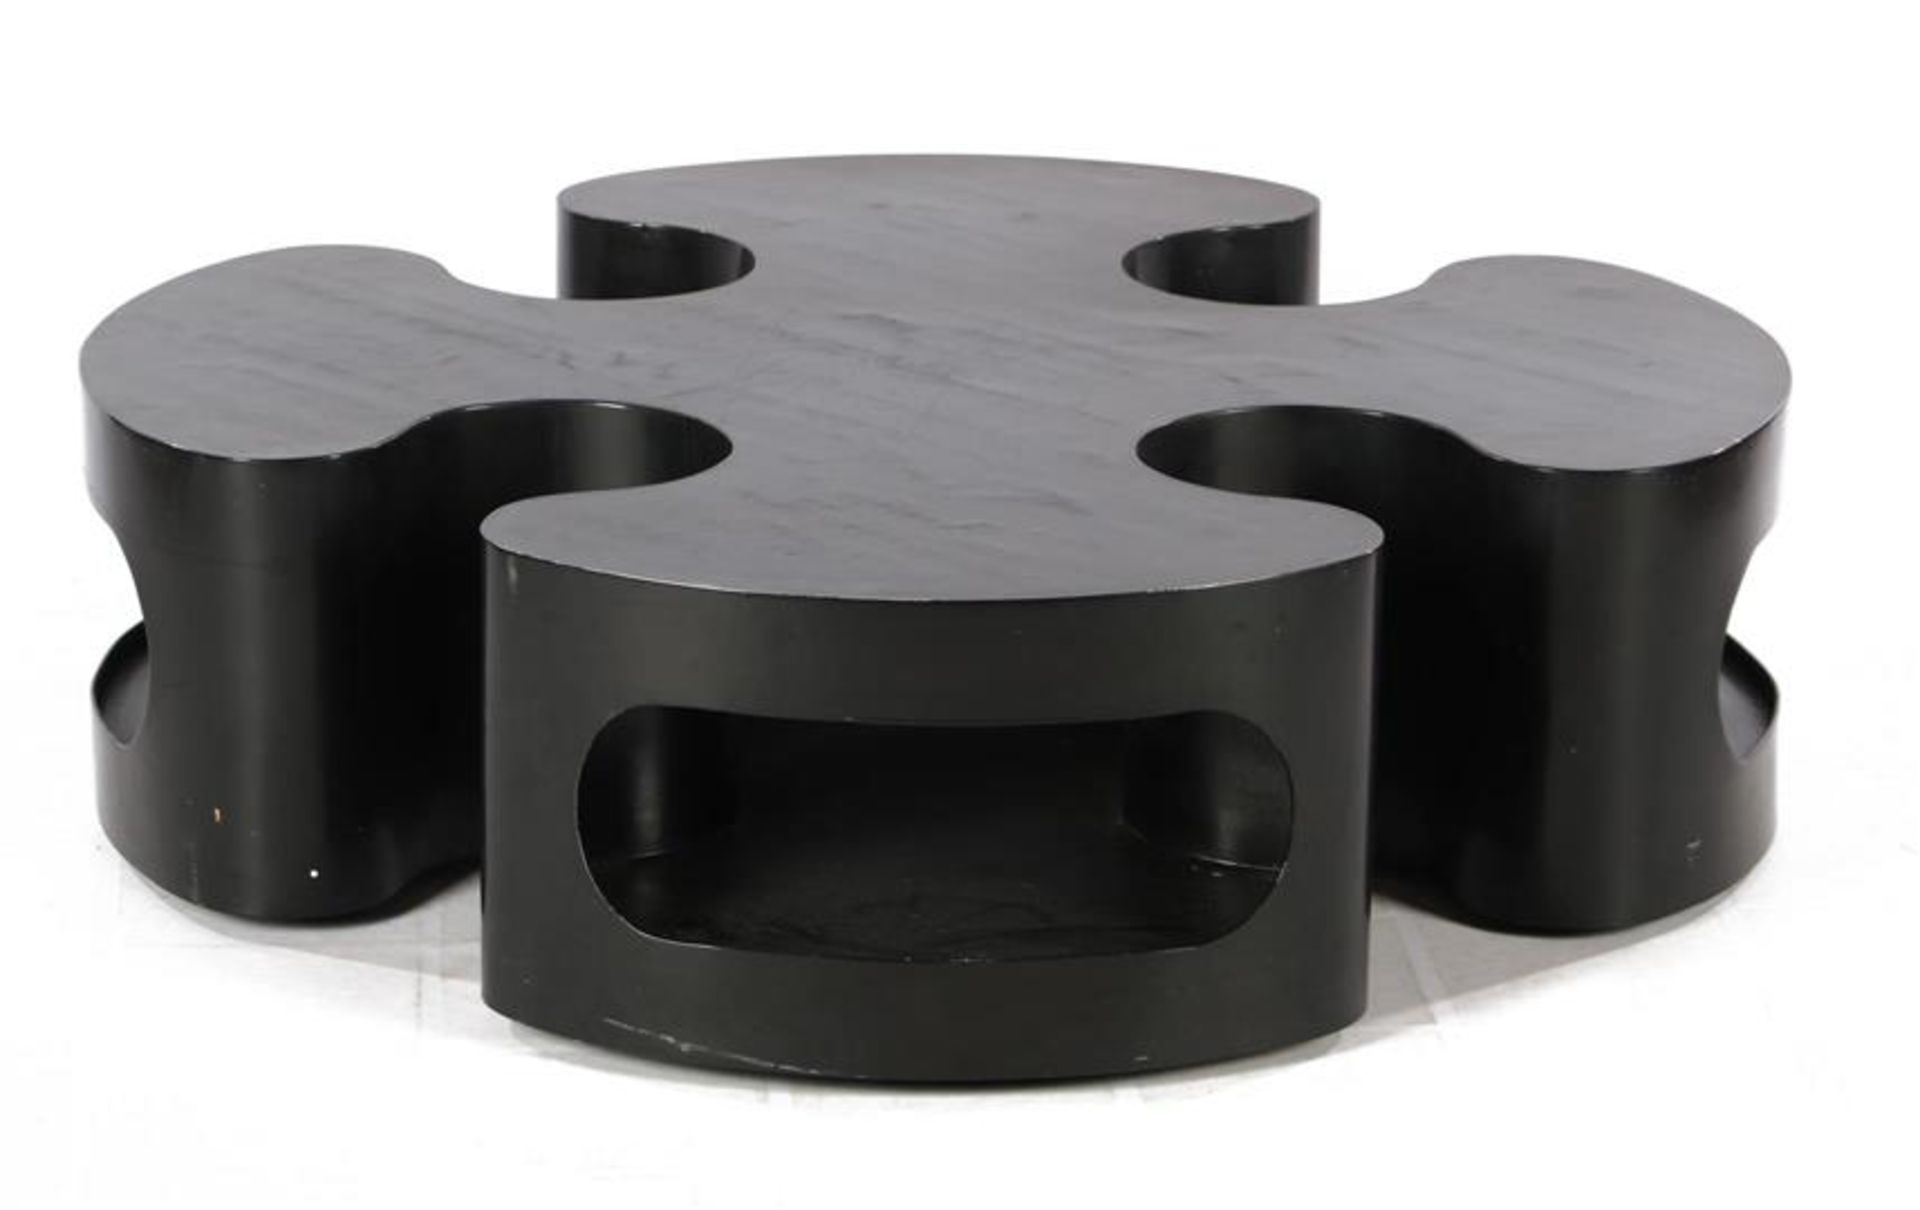 Black sprayed plastic Space Age coffee table with 4 open storage spaces, four-leaf clover, 30 cm